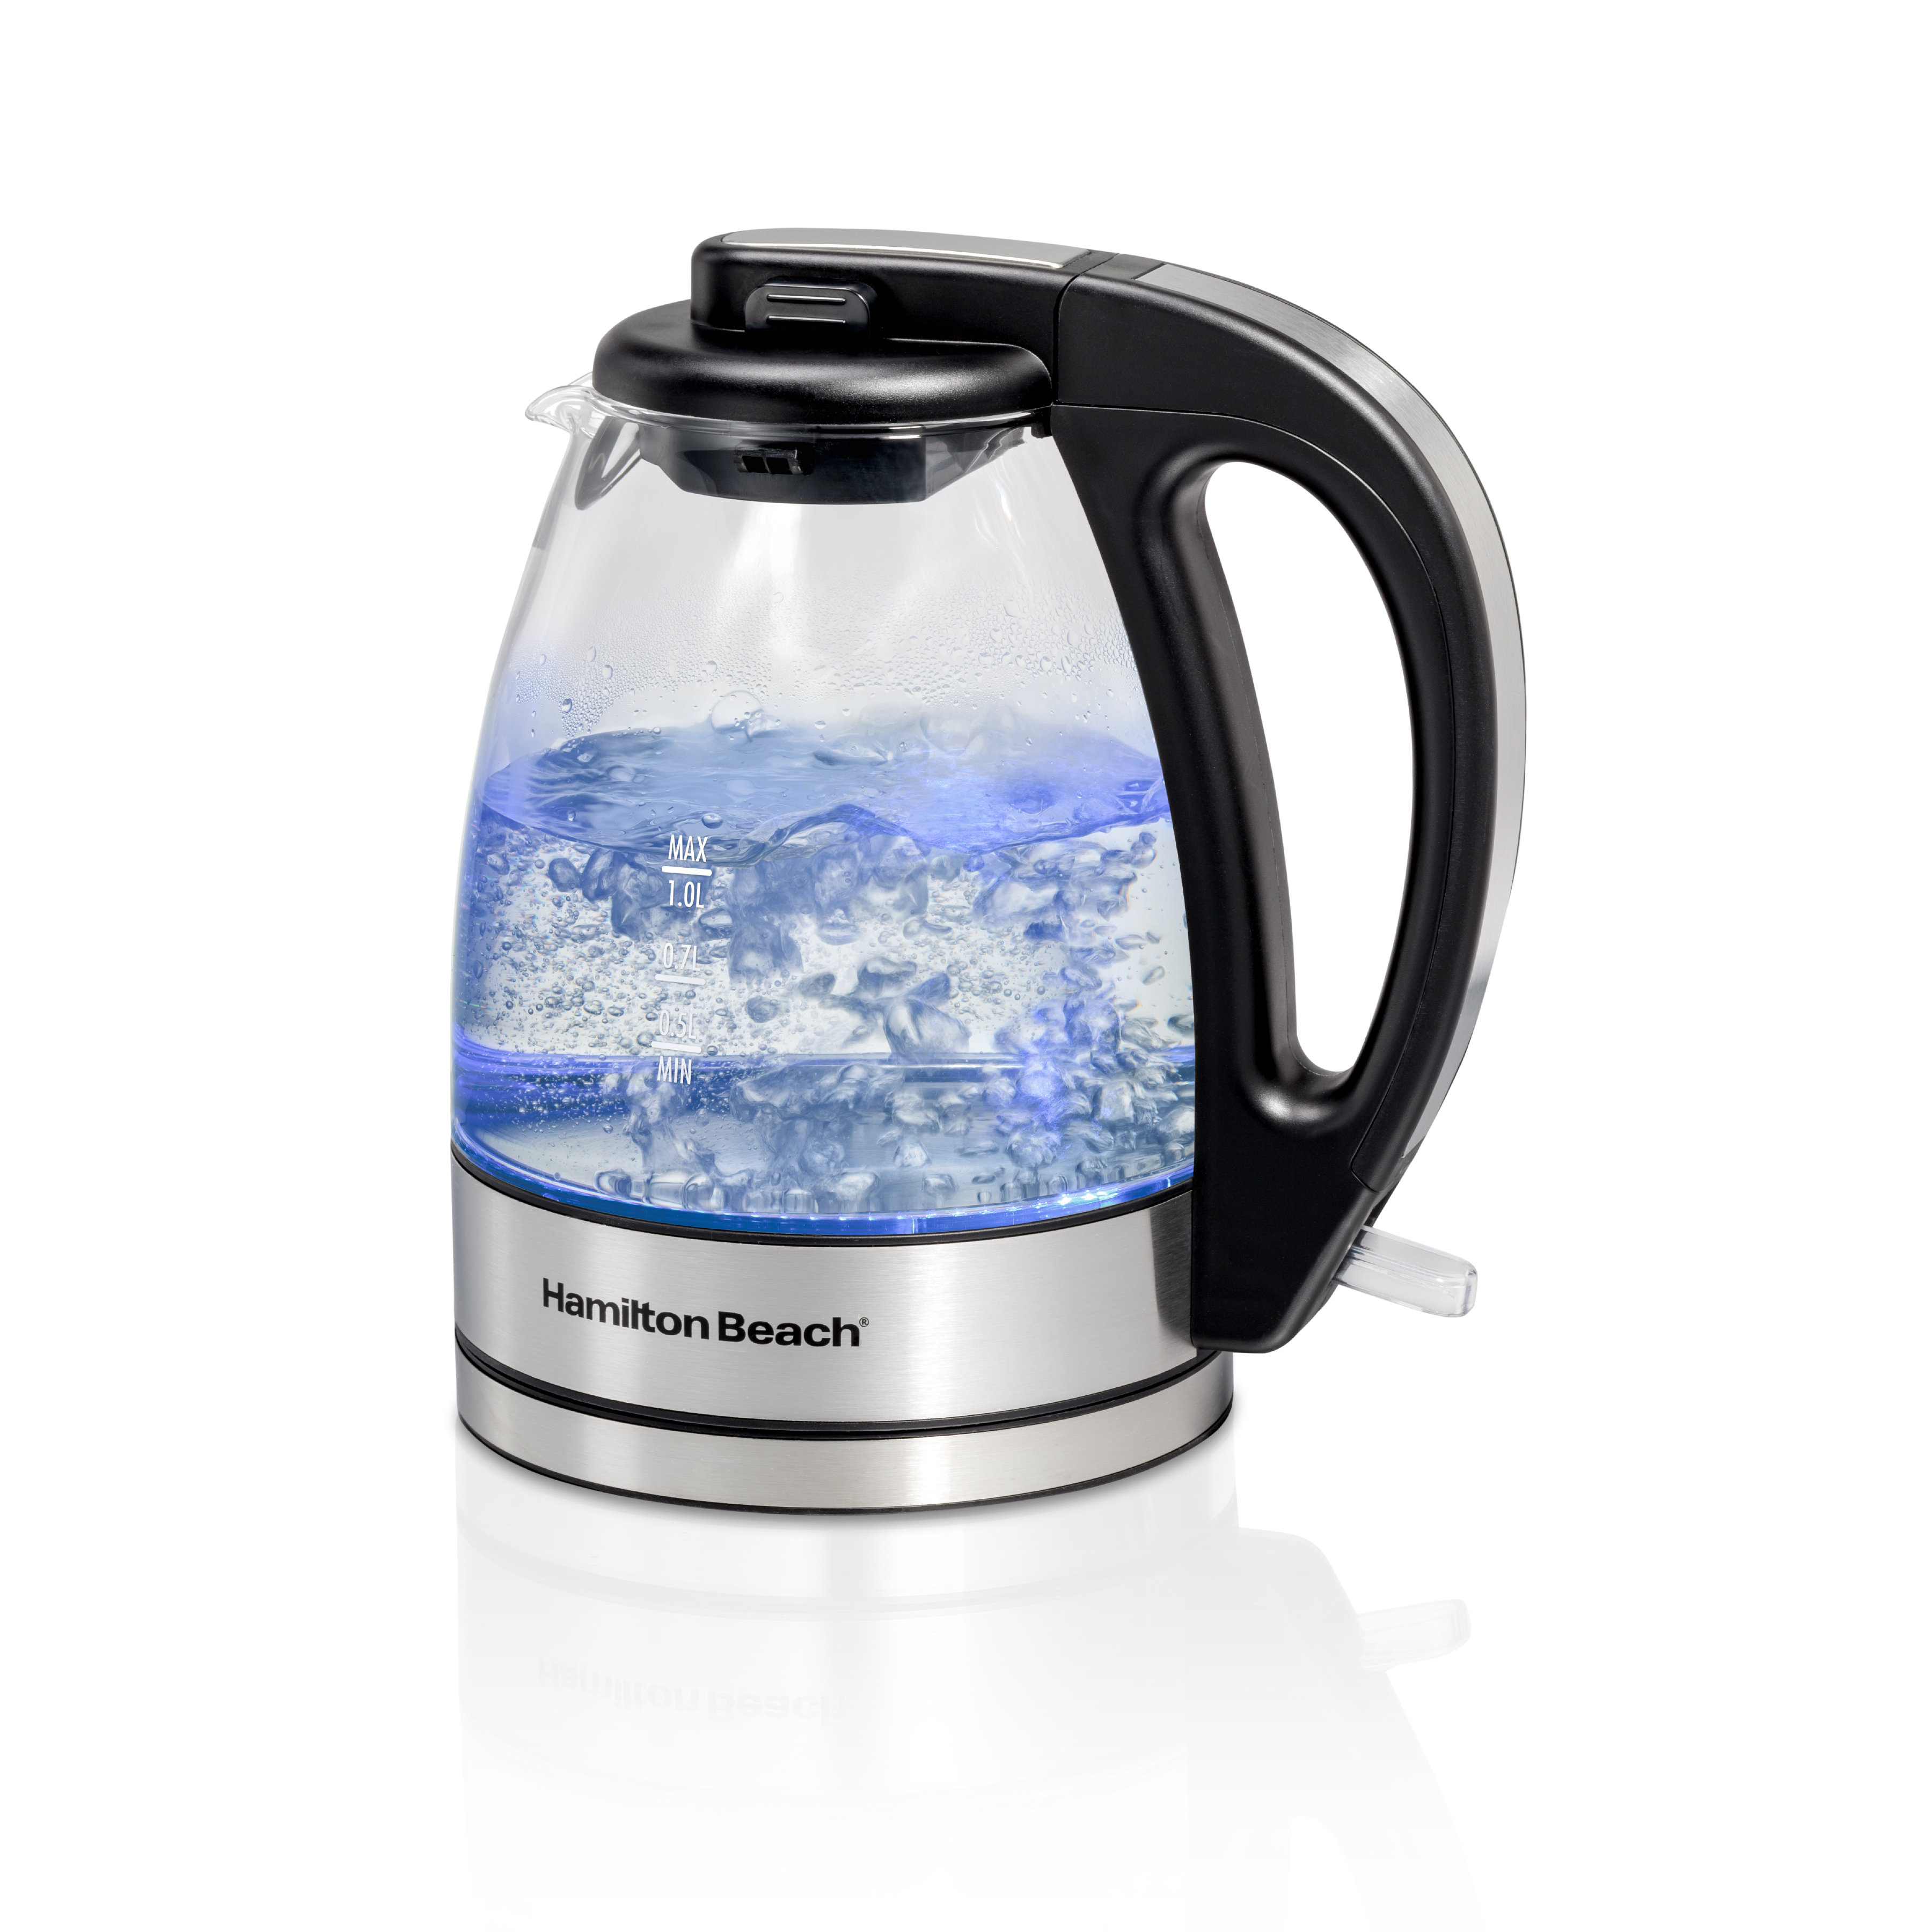 7 Best Electric Kettles of 2023 That Are Precise and Easy-Pouring